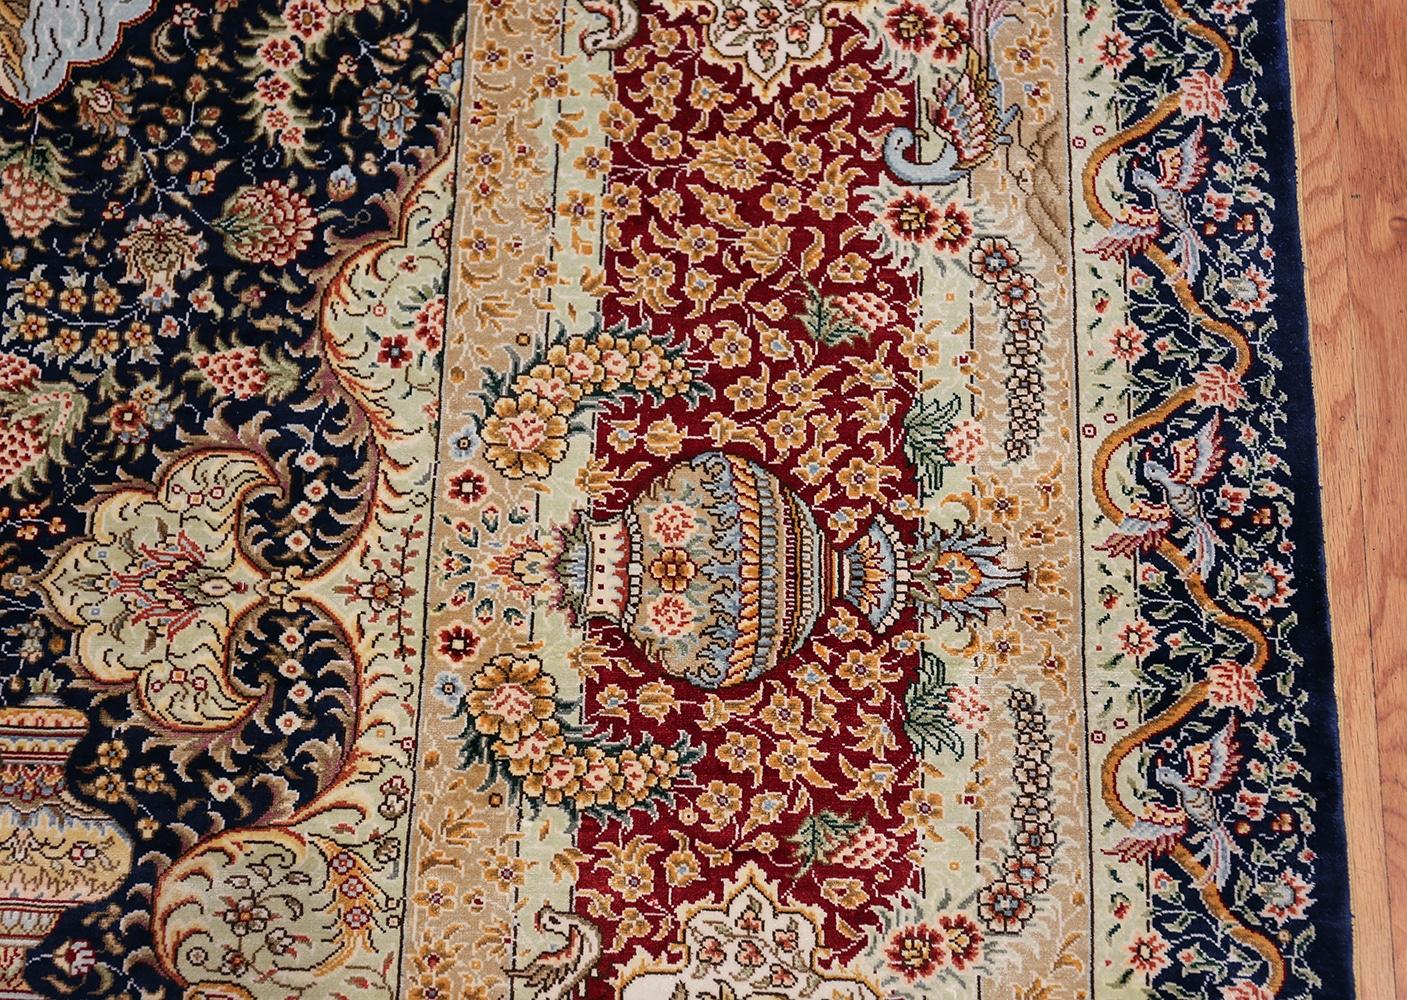 Other Silk Modern Chinese Rug. 9 ft x 11 ft 9 in (2.74 m x 3.58 m) For Sale